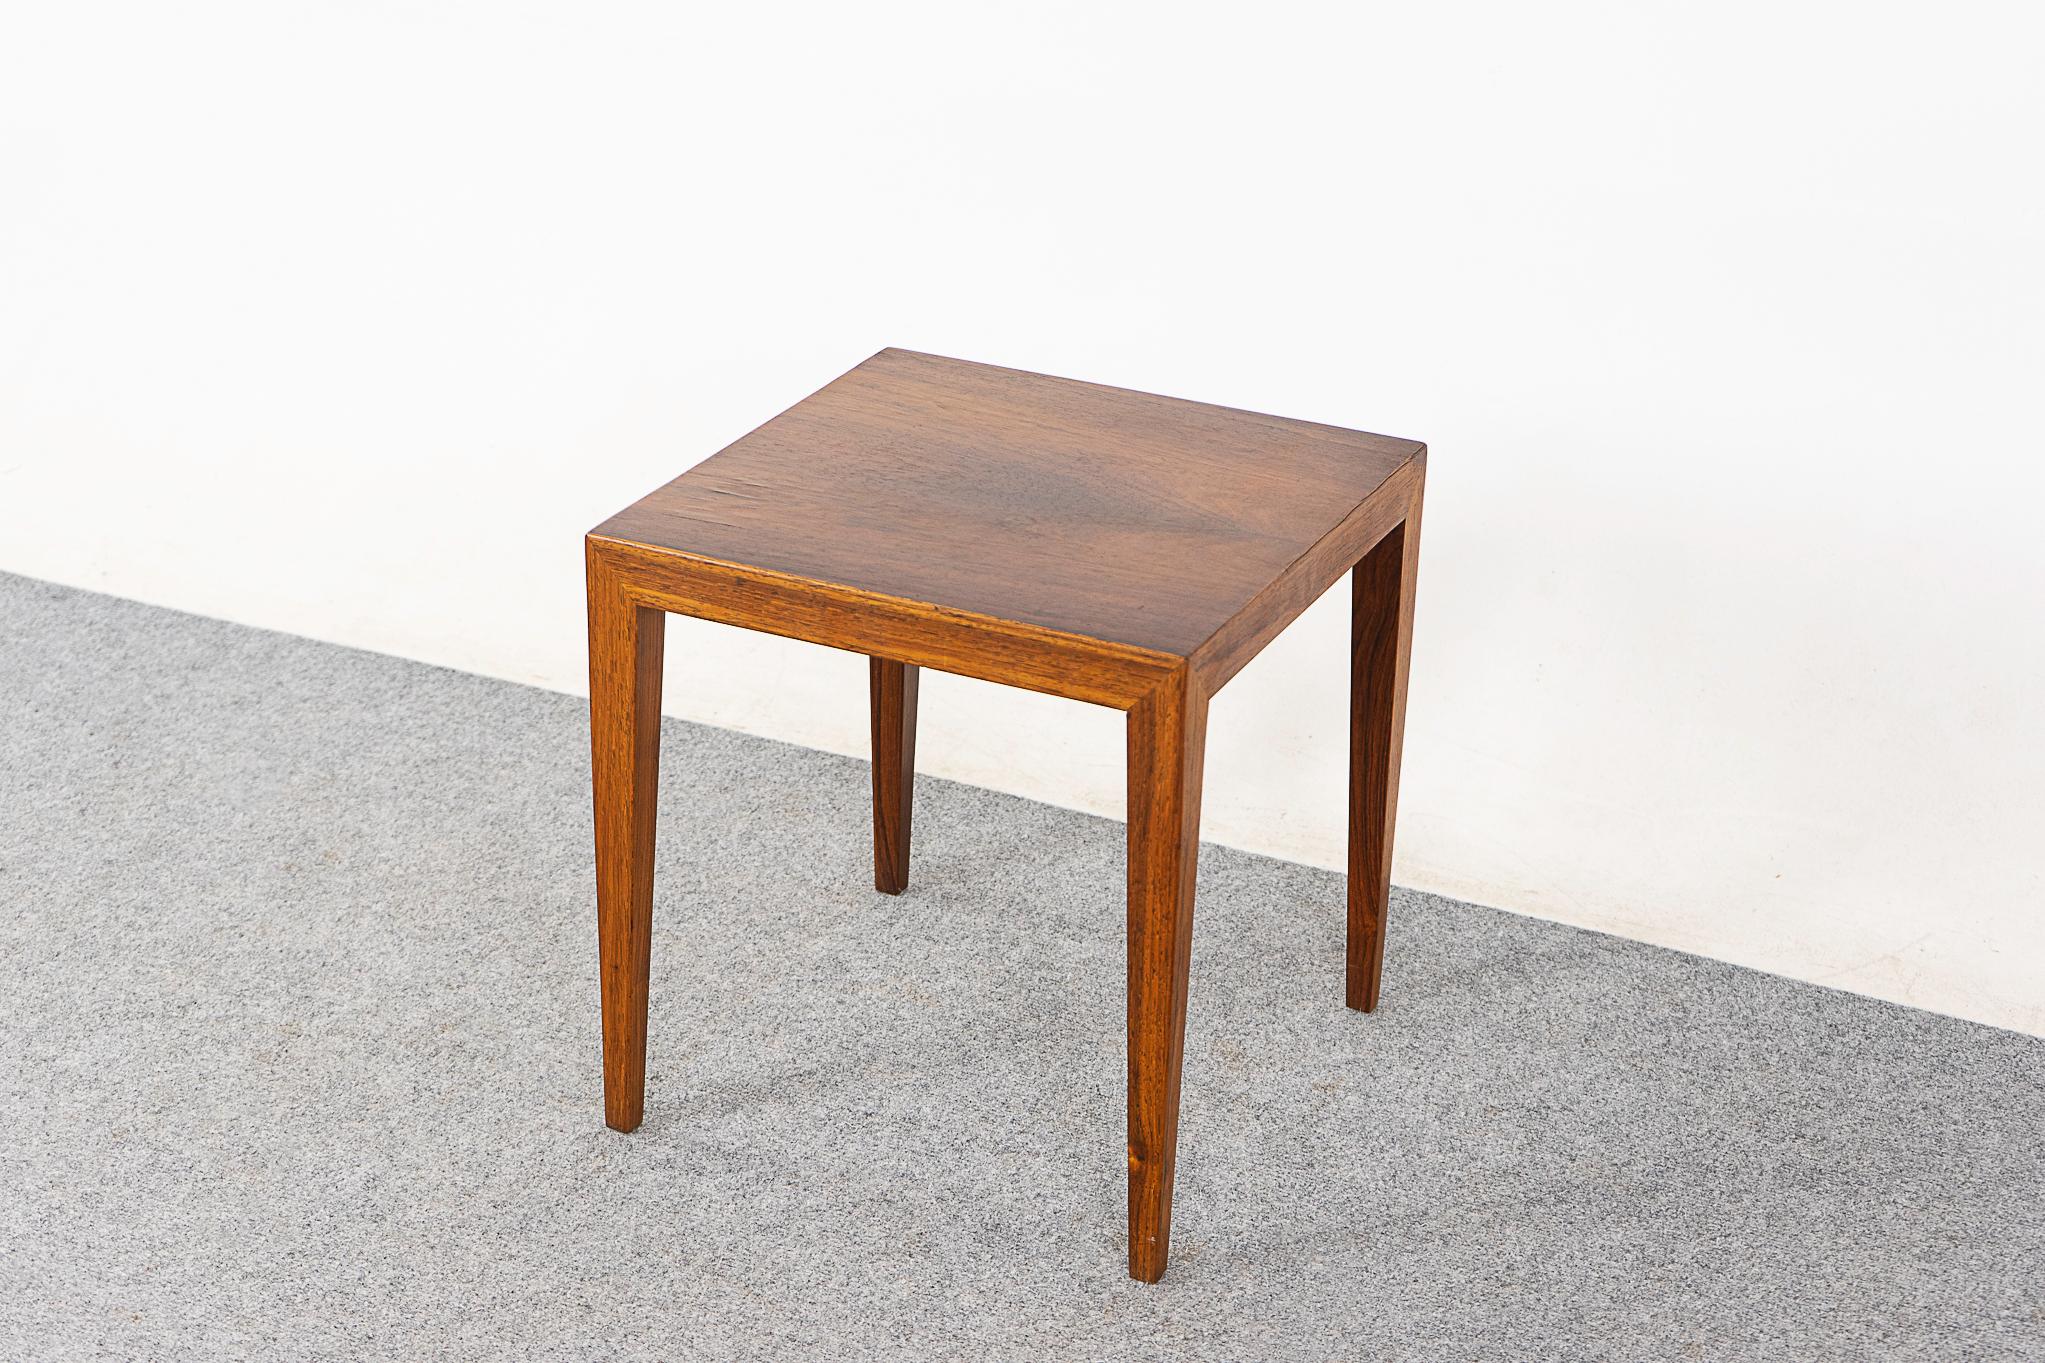 Rosewood mid-century side table by Severin Hansen for Haslev, circa 1960's. Slick corner joinery detailing, beautiful grain pattern up top, sleek timeless lines! 

Unrestored item, some marks consistent with age.

Please inquire international and